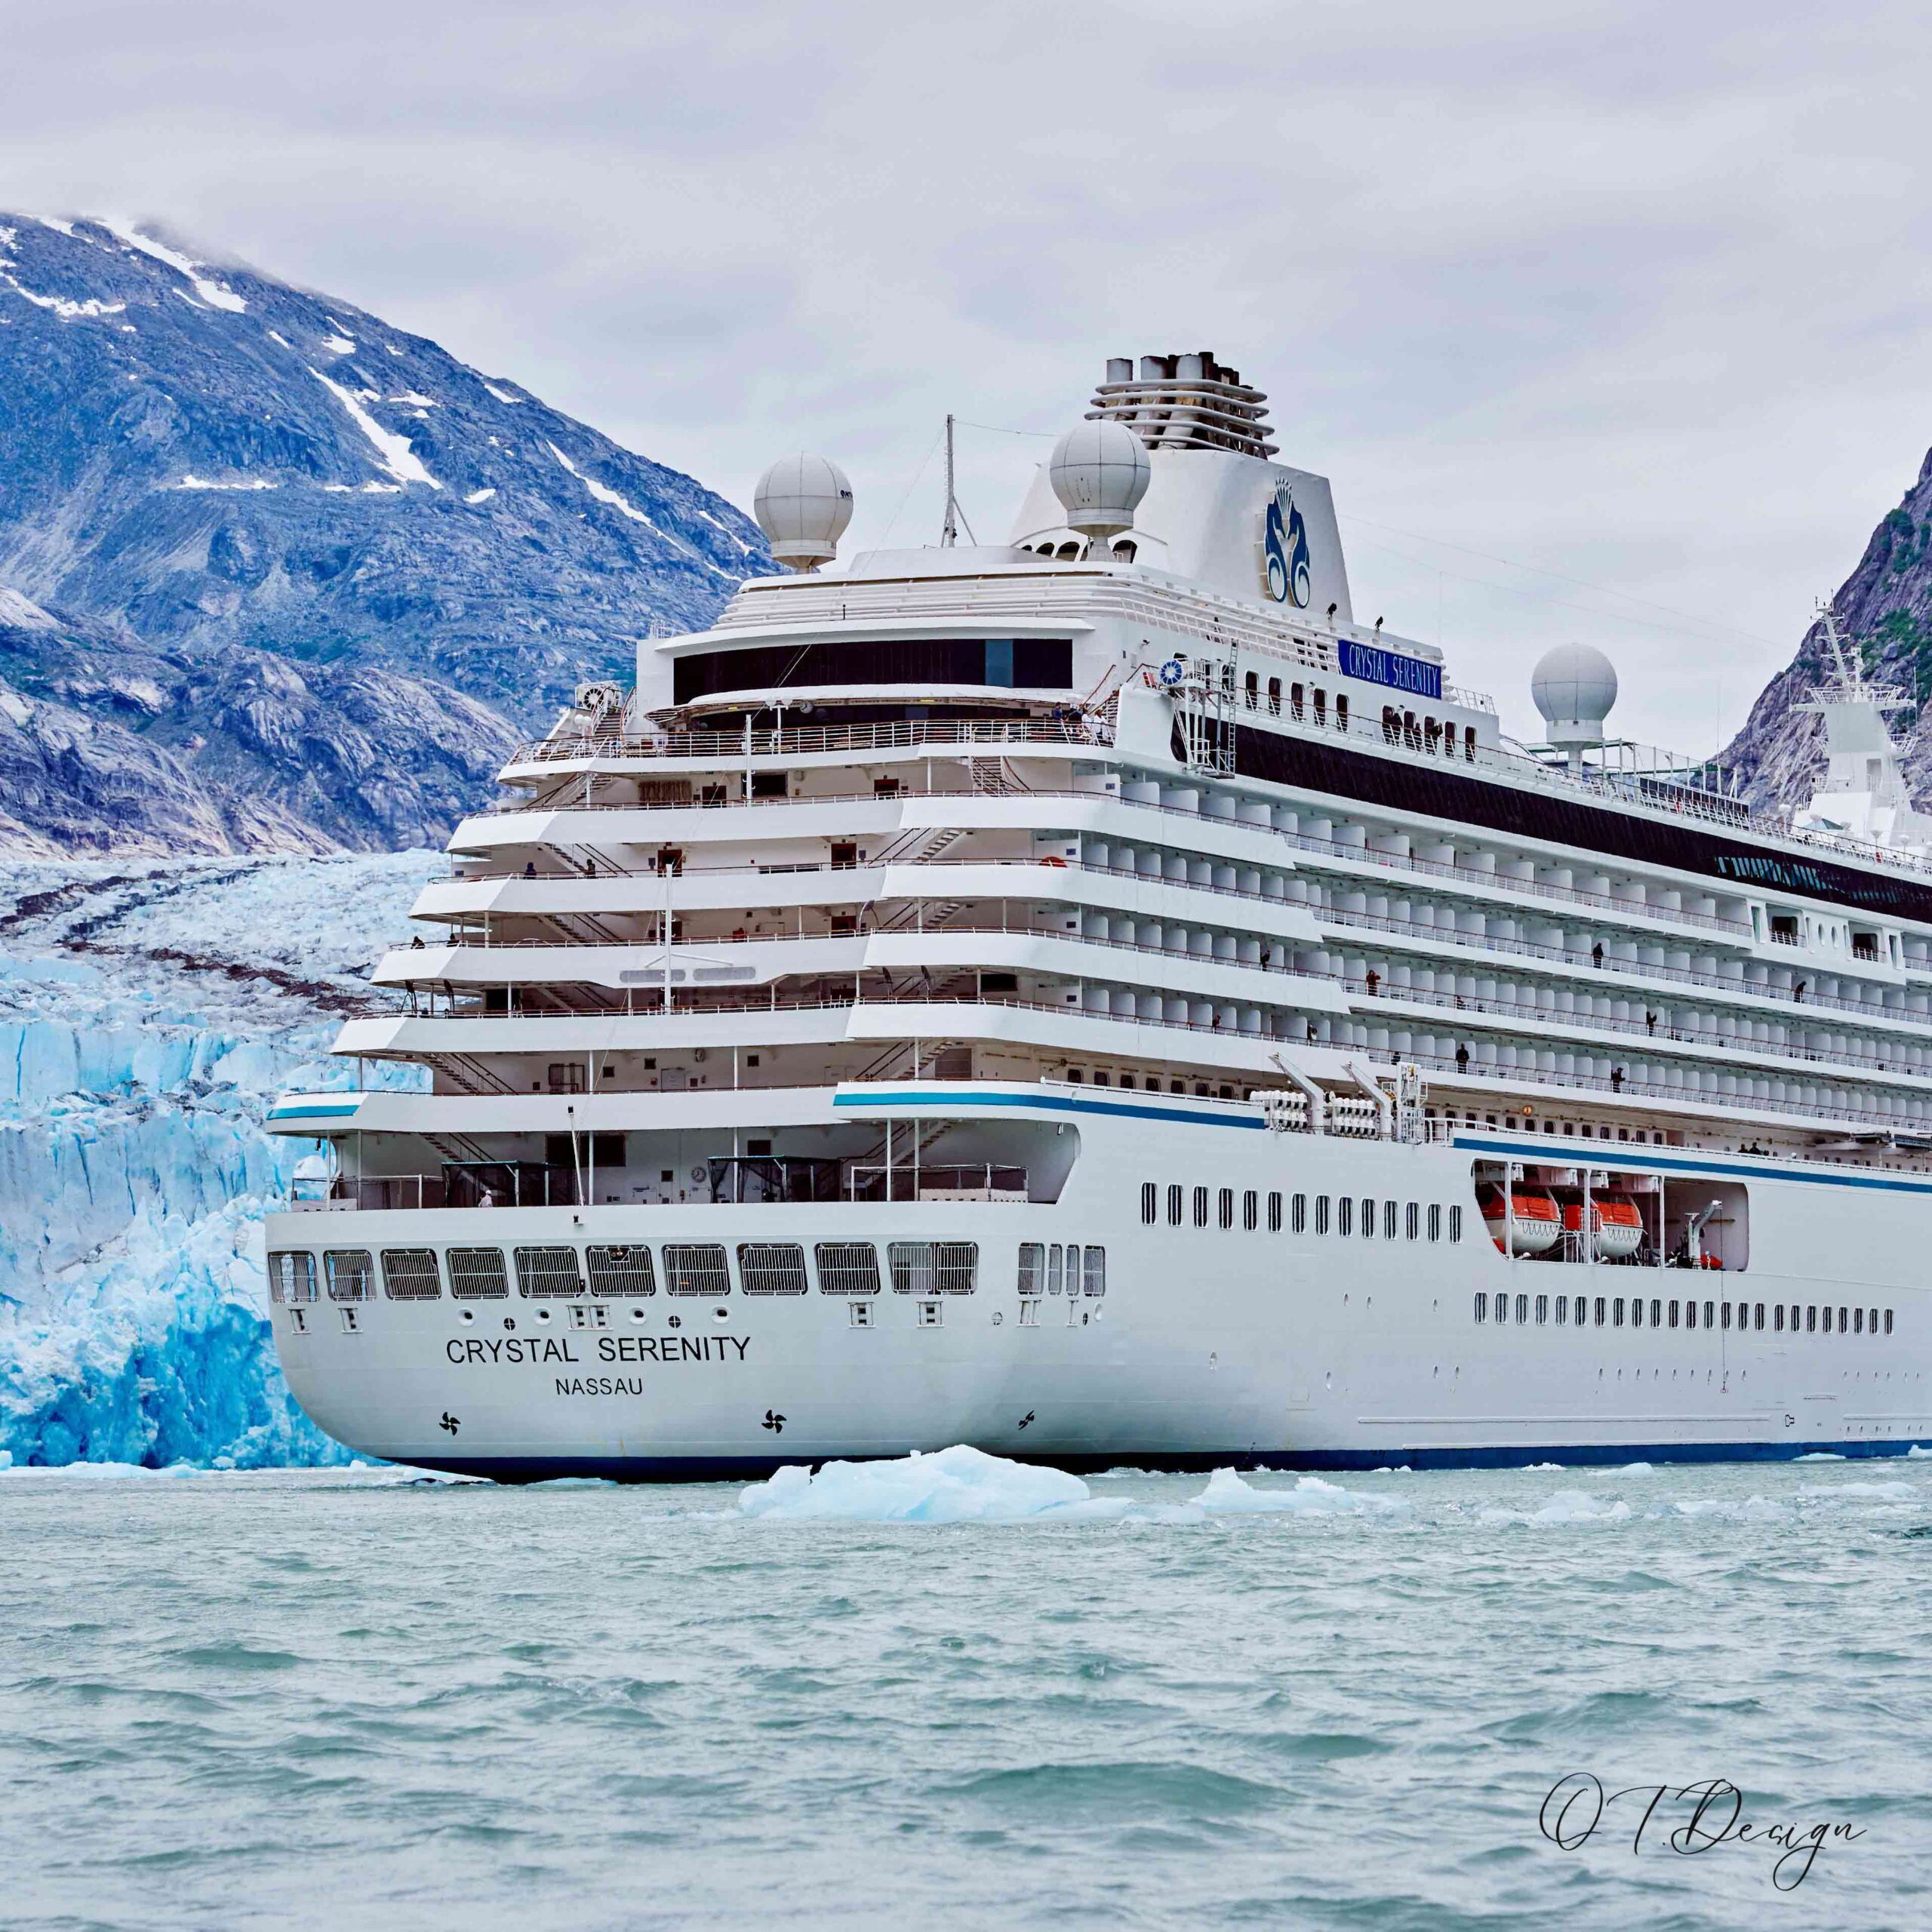 Crystal Serenity in front of the majestic ice glacier in Endicott Arm, Alaska